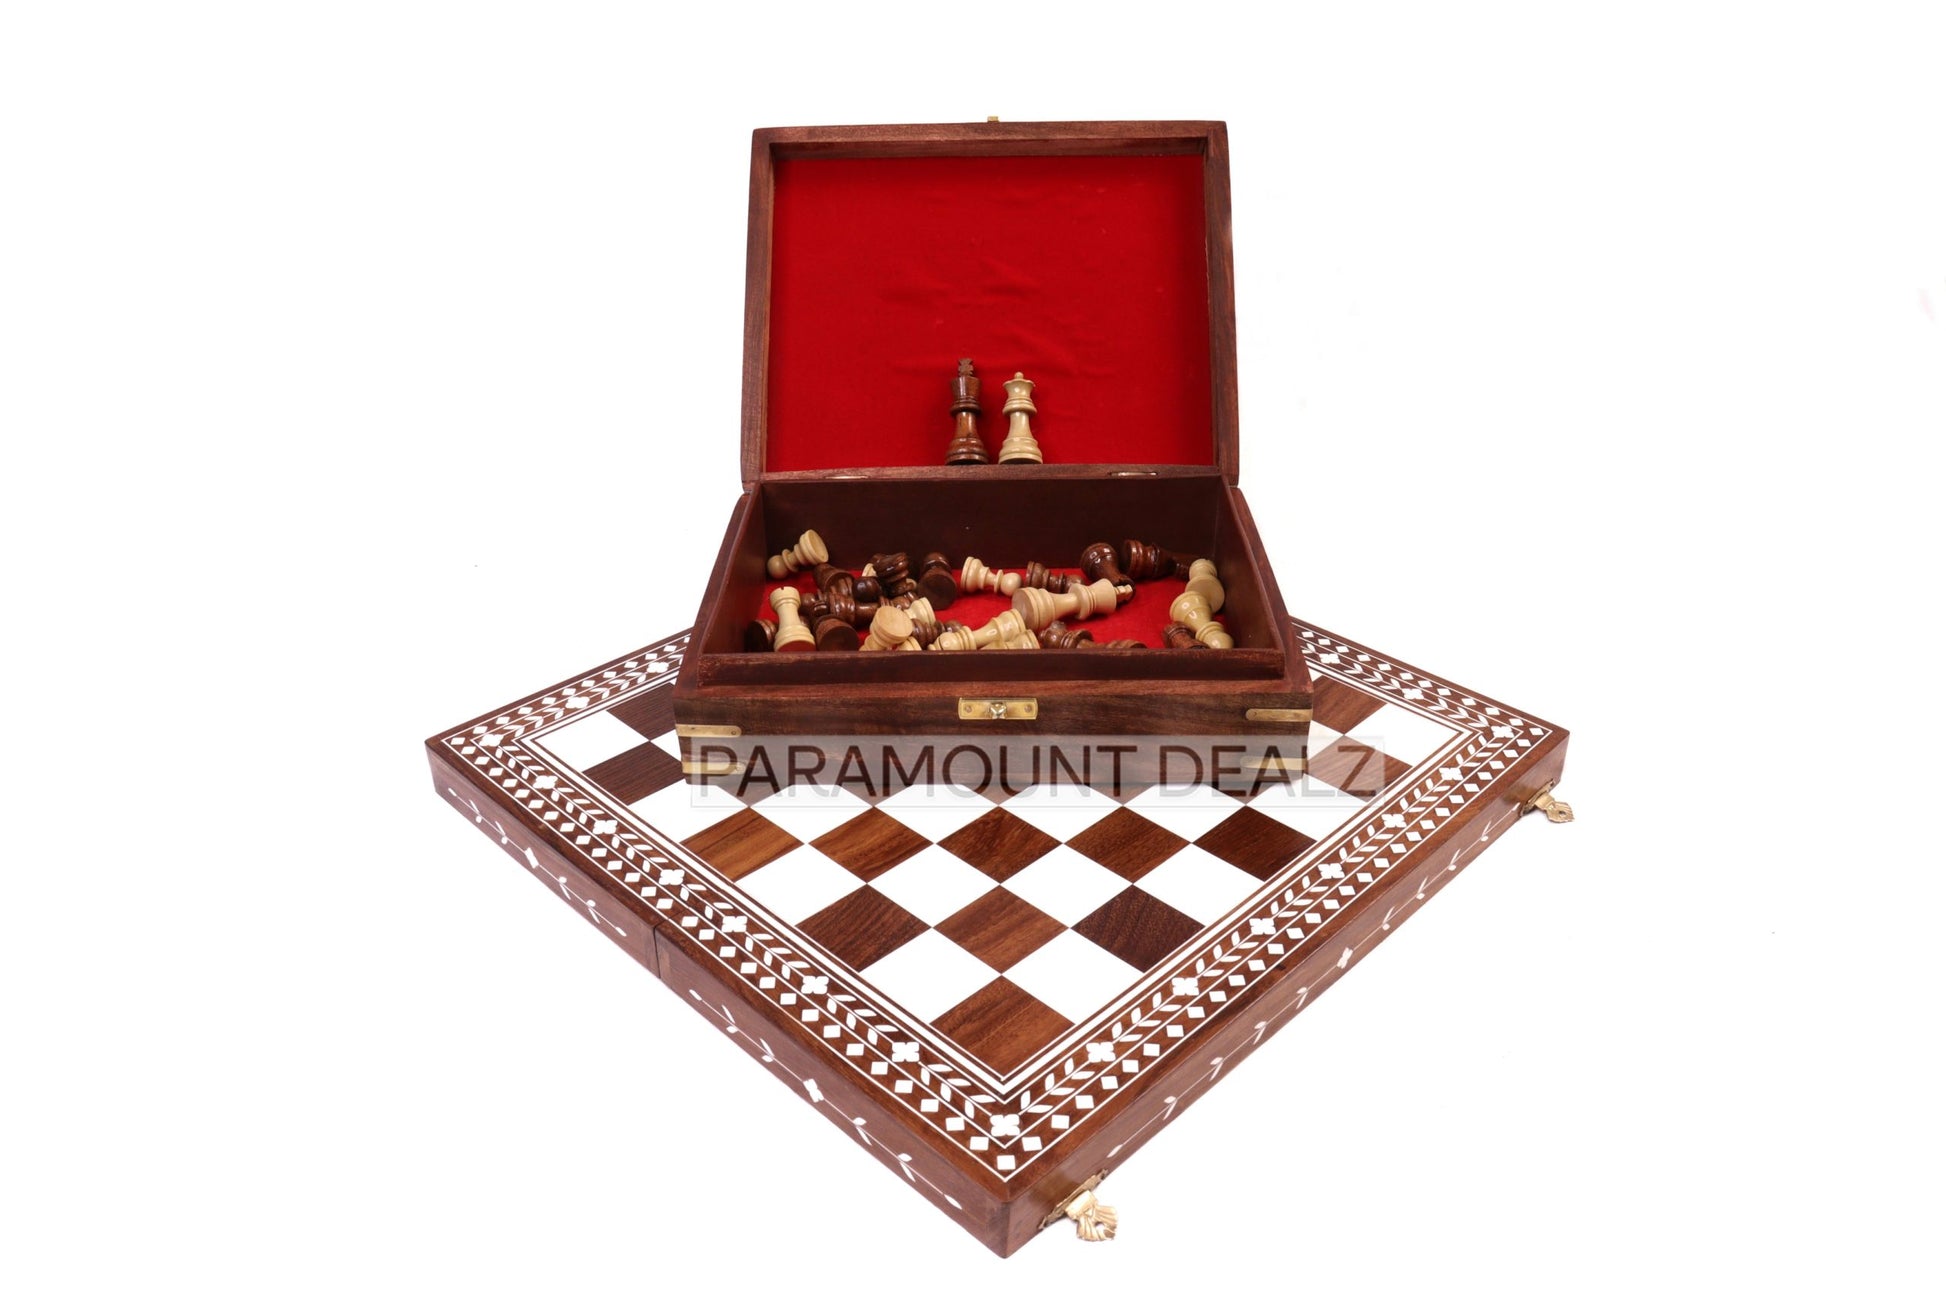 WOODEN FOLDING CHESS SET WITH WOODEN STAUNTION COINS